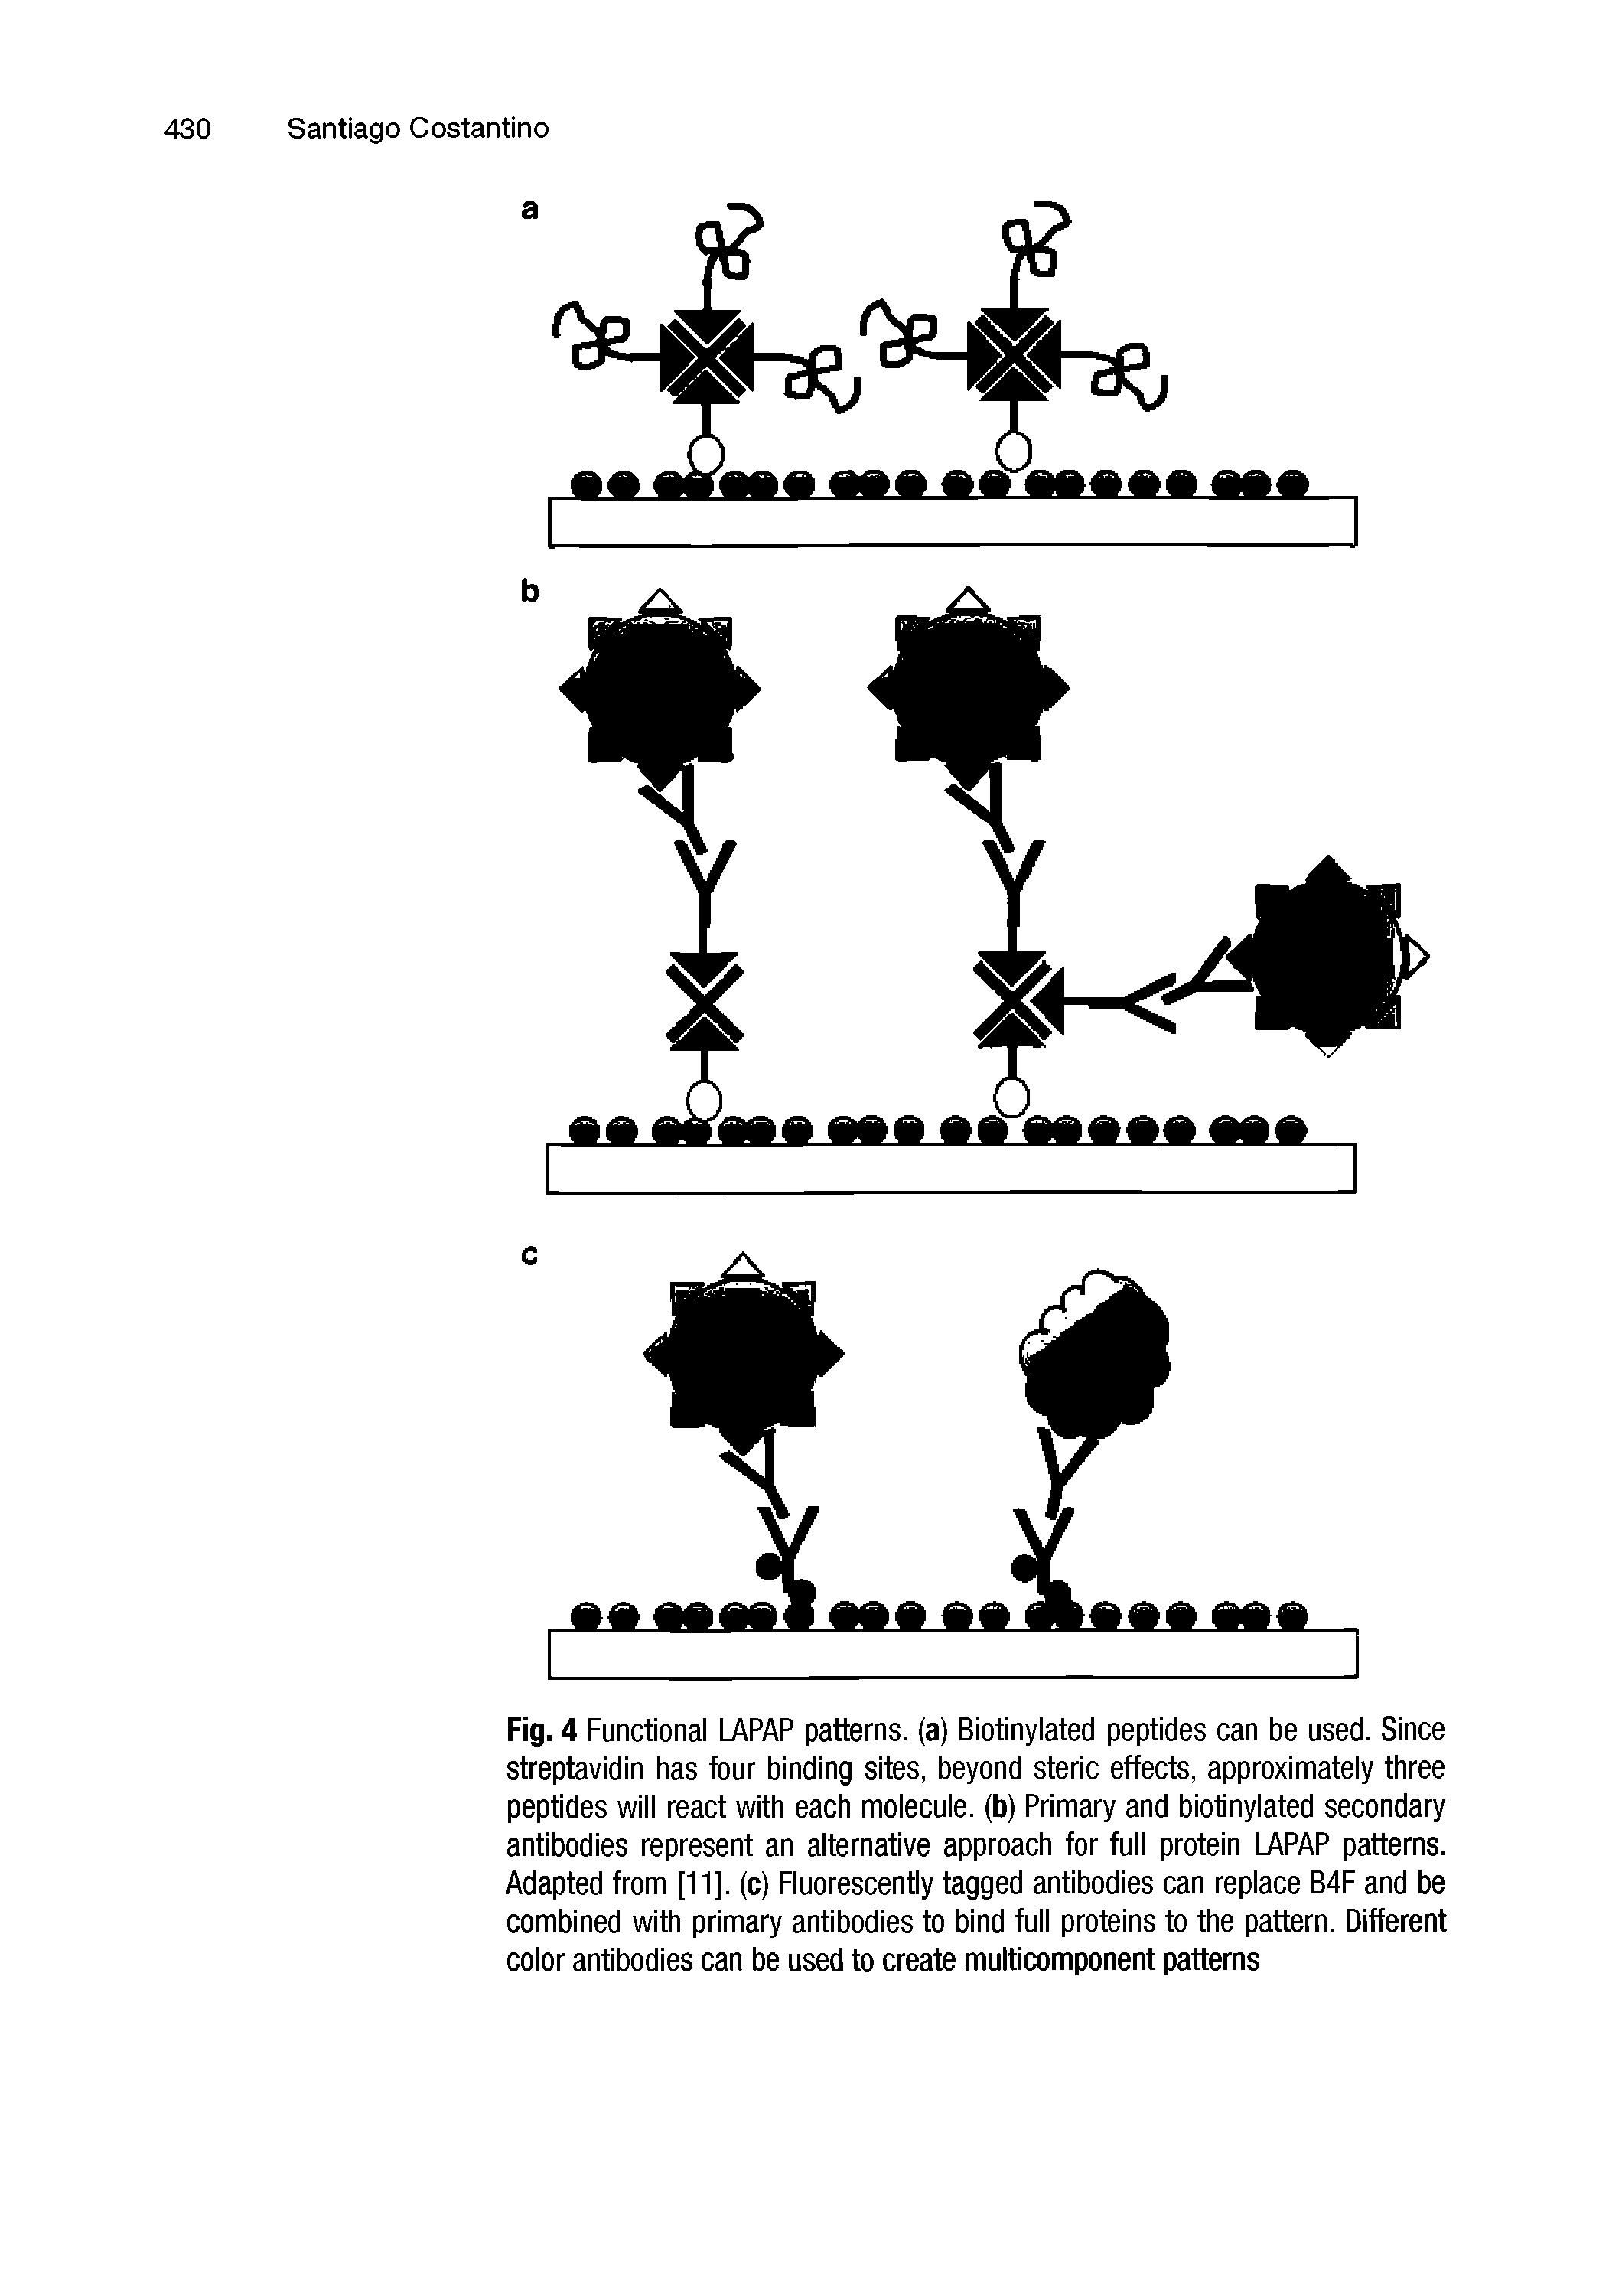 Fig. 4 Functional LAPAP patterns, (a) Biotinylated peptides can be used. Since streptavidin has four binding sites, beyond steric effects, approximately three peptides will react with each molecule, (b) Primary and biotinylated secondary antibodies represent an alternative approach for full protein LAPAP patterns. Adapted from [11]. (c) Fluorescently tagged antibodies can replace B4F and be combined with primary antibodies to bind full proteins to the pattern. Different color antibodies can be used to create multicomponent patterns...